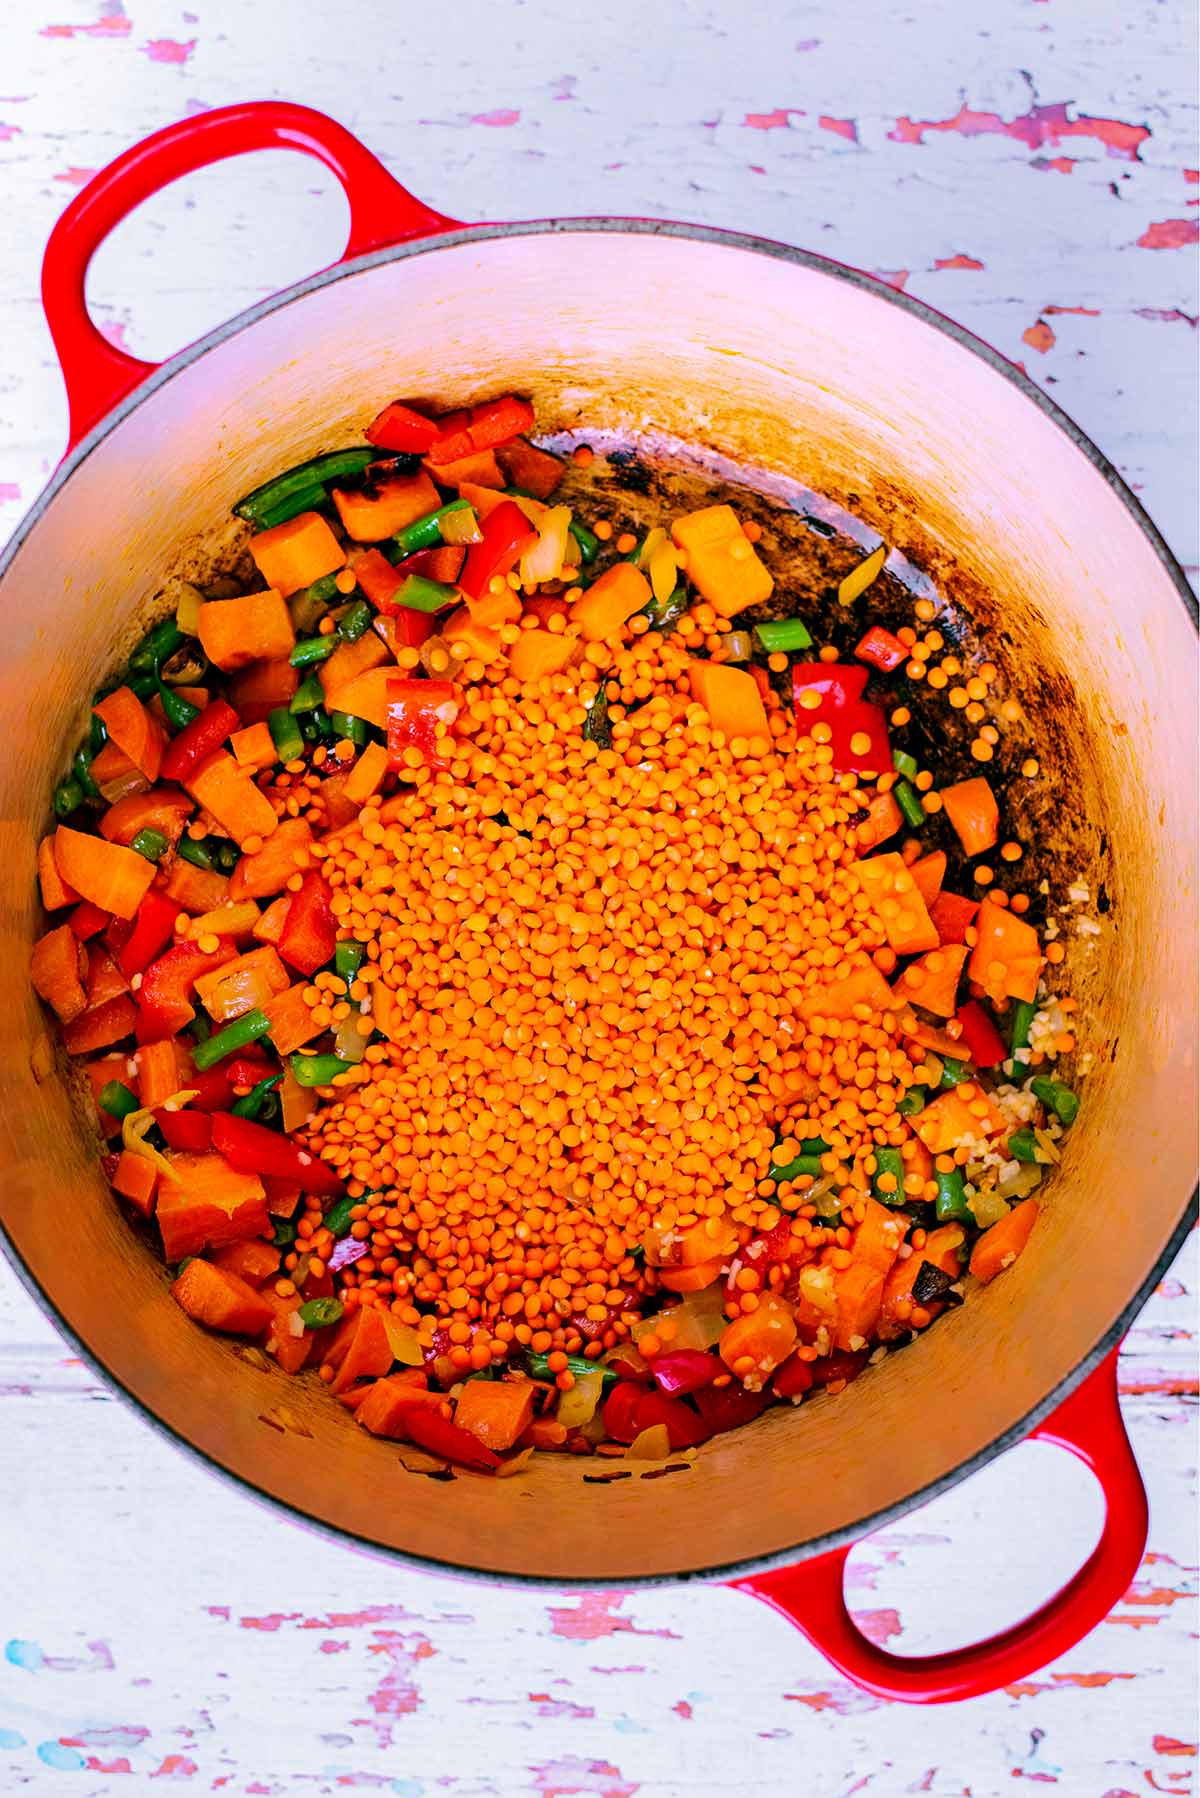 Chopped vegetables and red lentils cooking in a large pot.